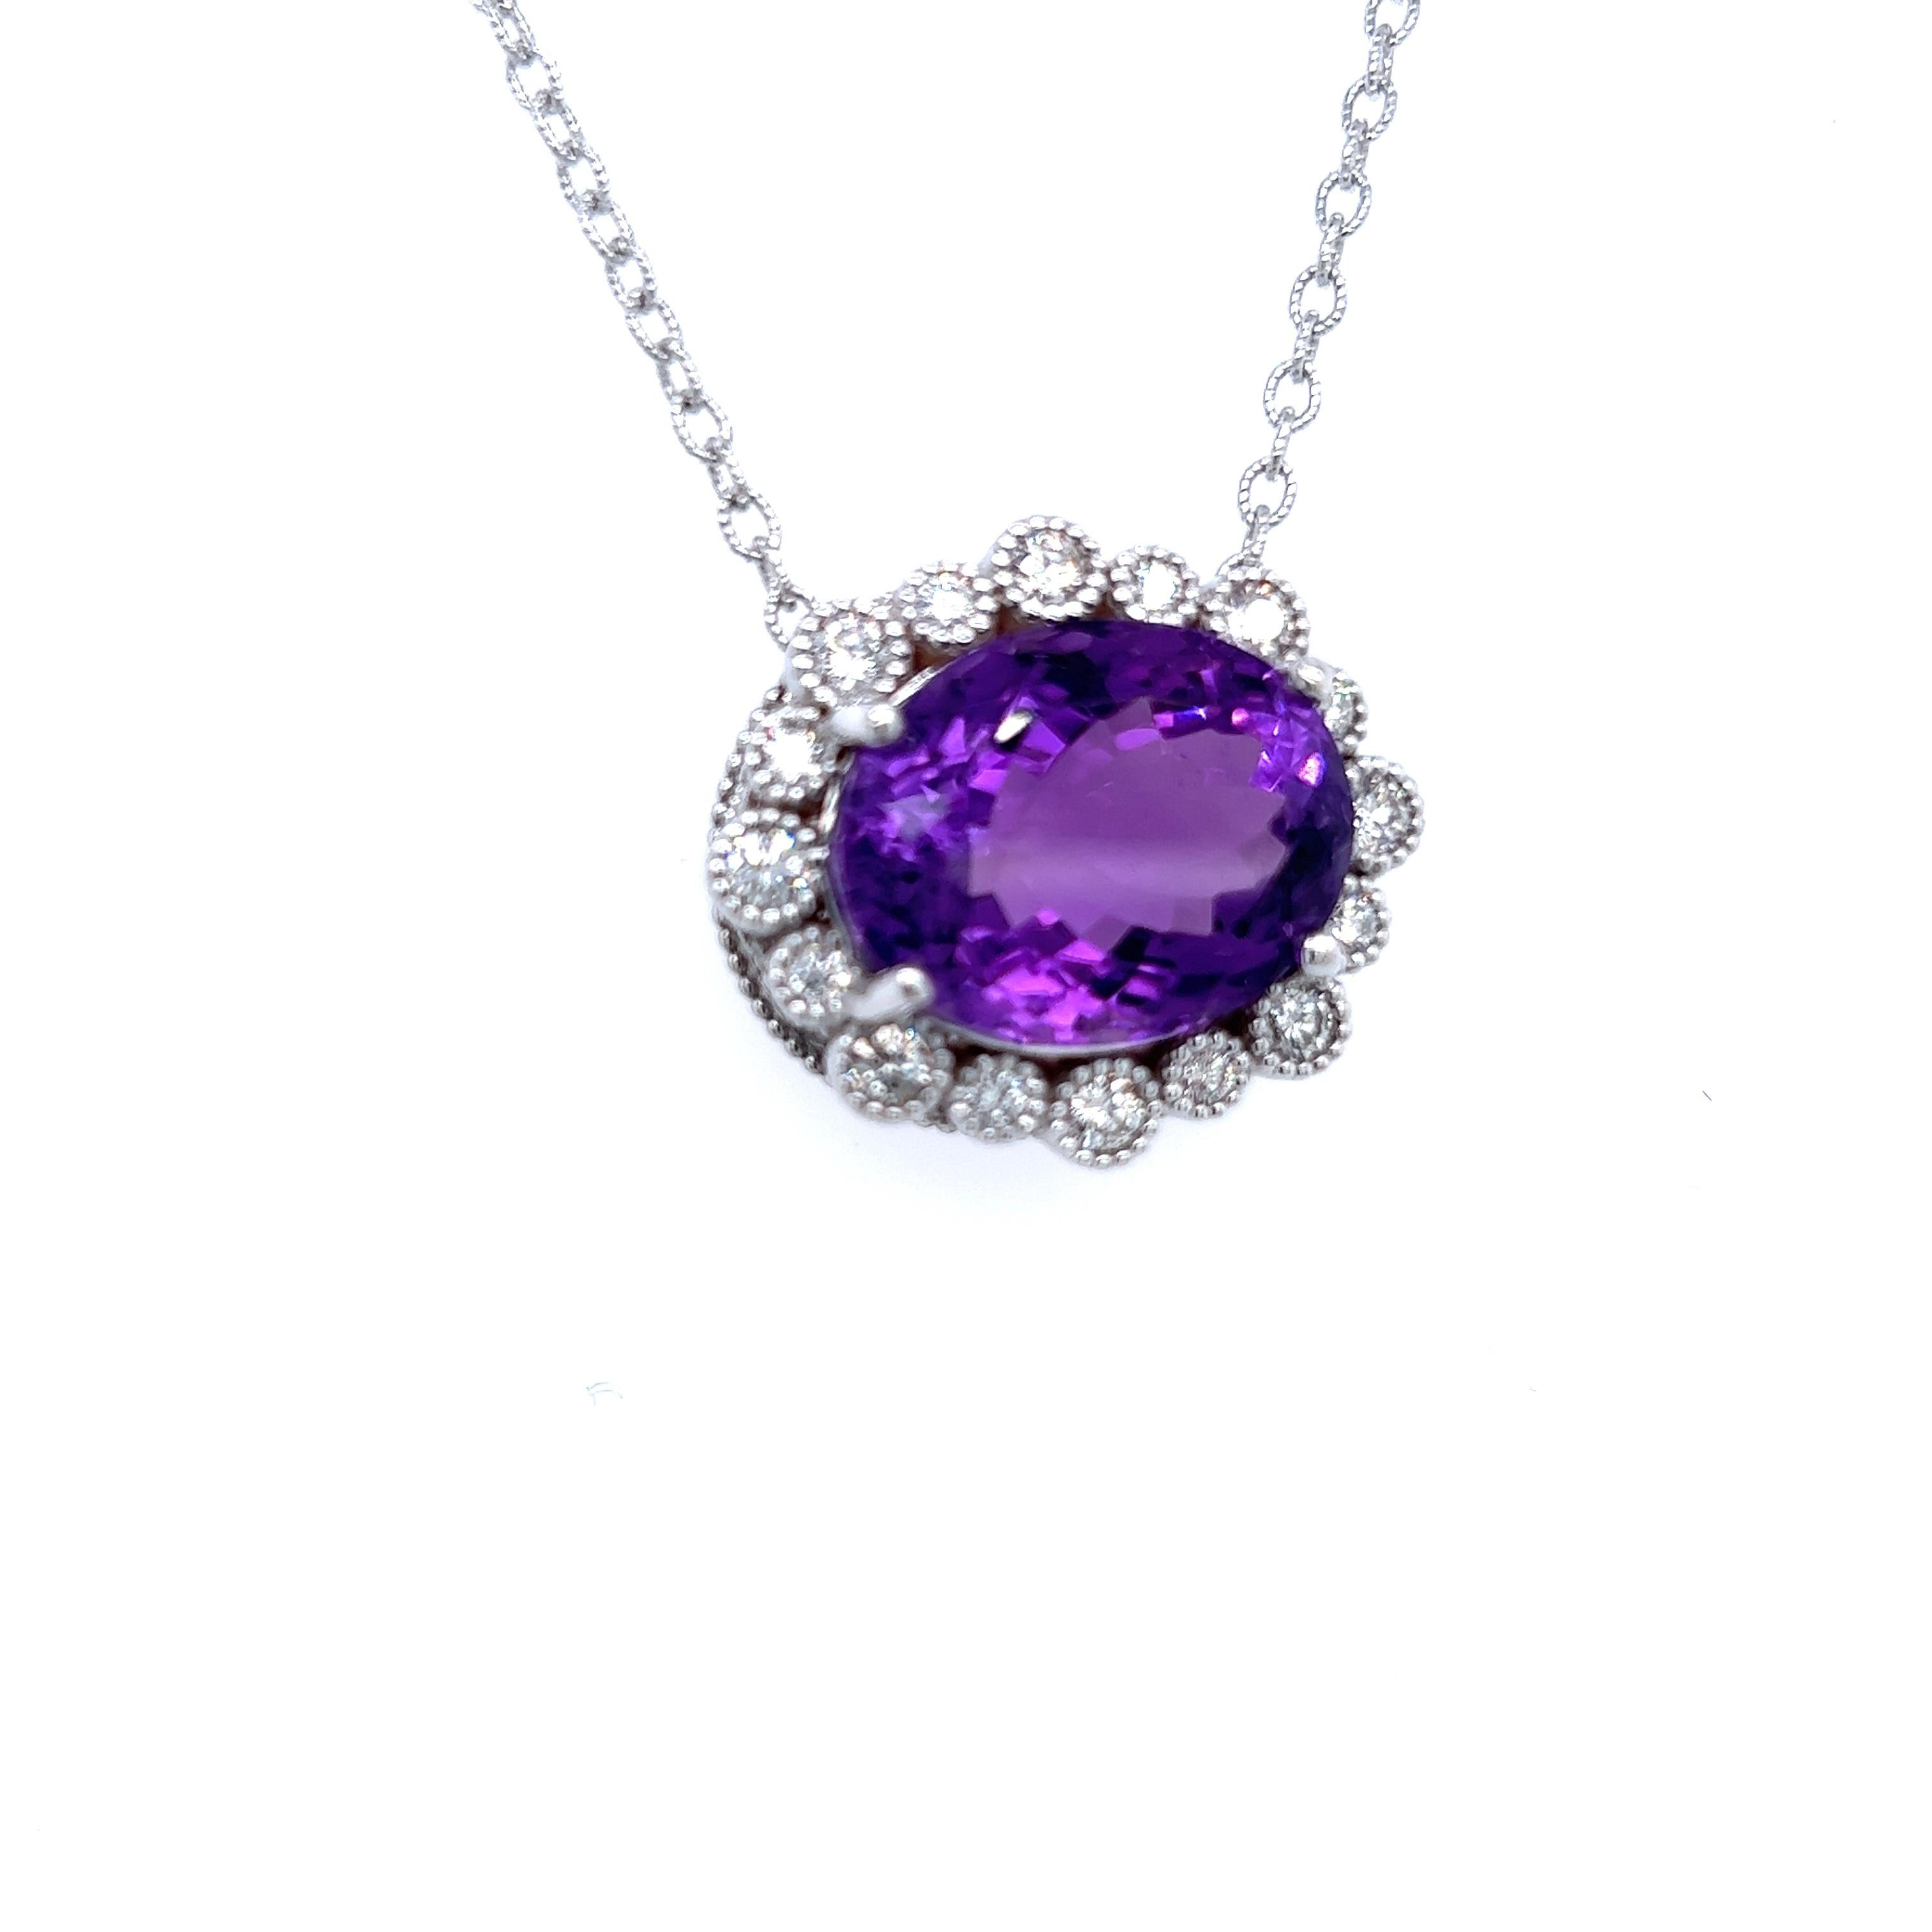 Natural Amethyst Diamond Pendant with Chain 14k W Gold 15.51 TCW Certified For Sale 2